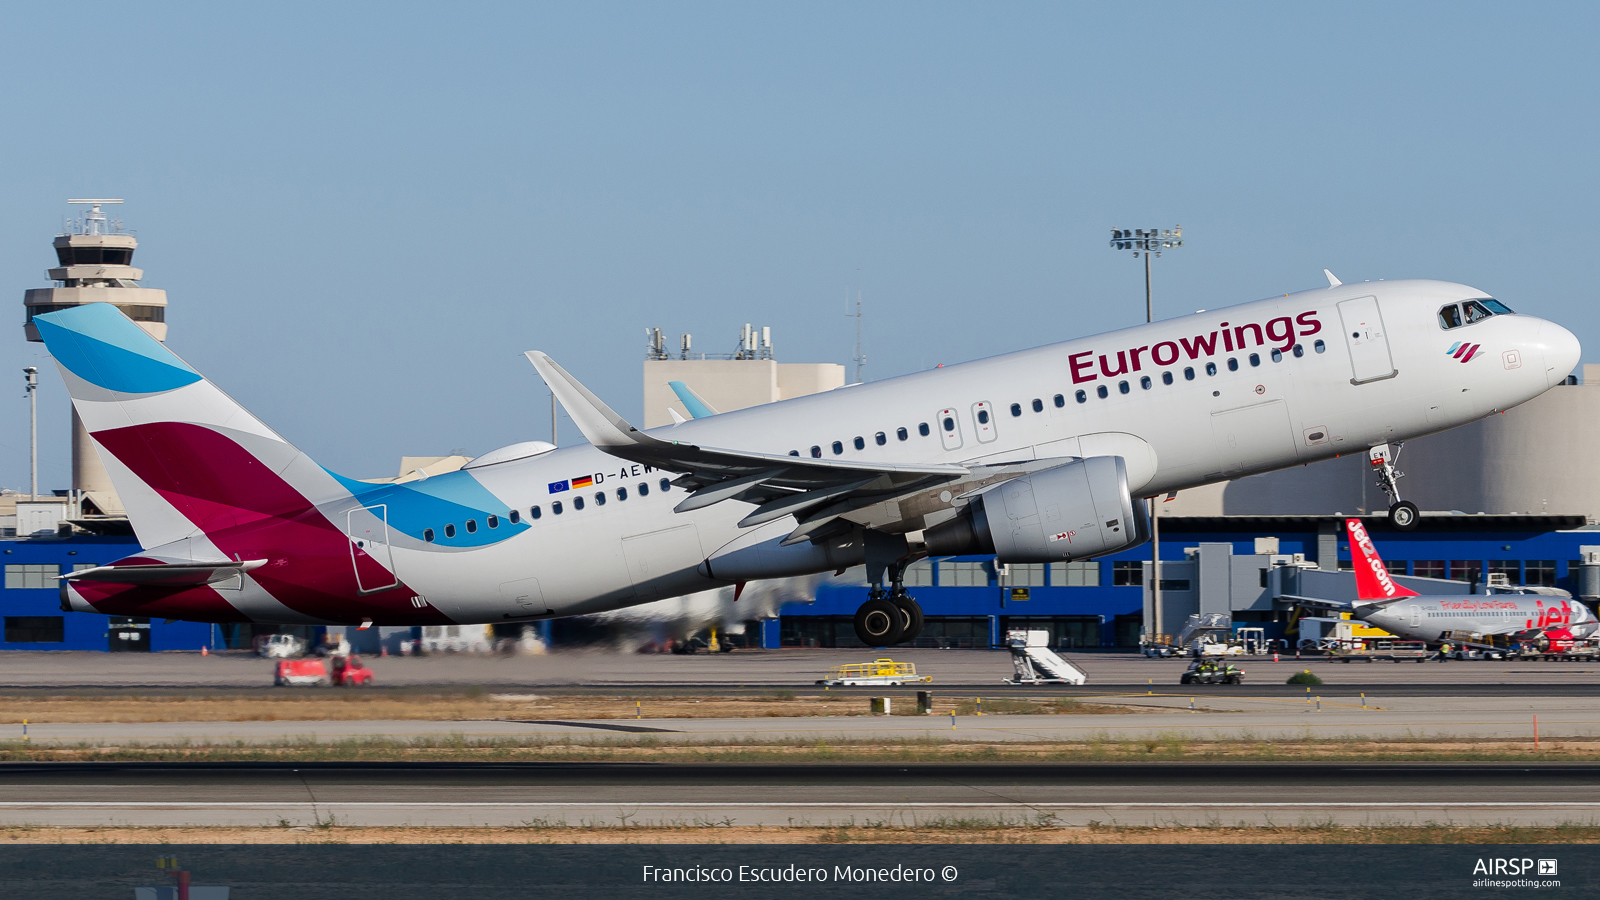 Eurowings  Airbus A320  D-AEWI